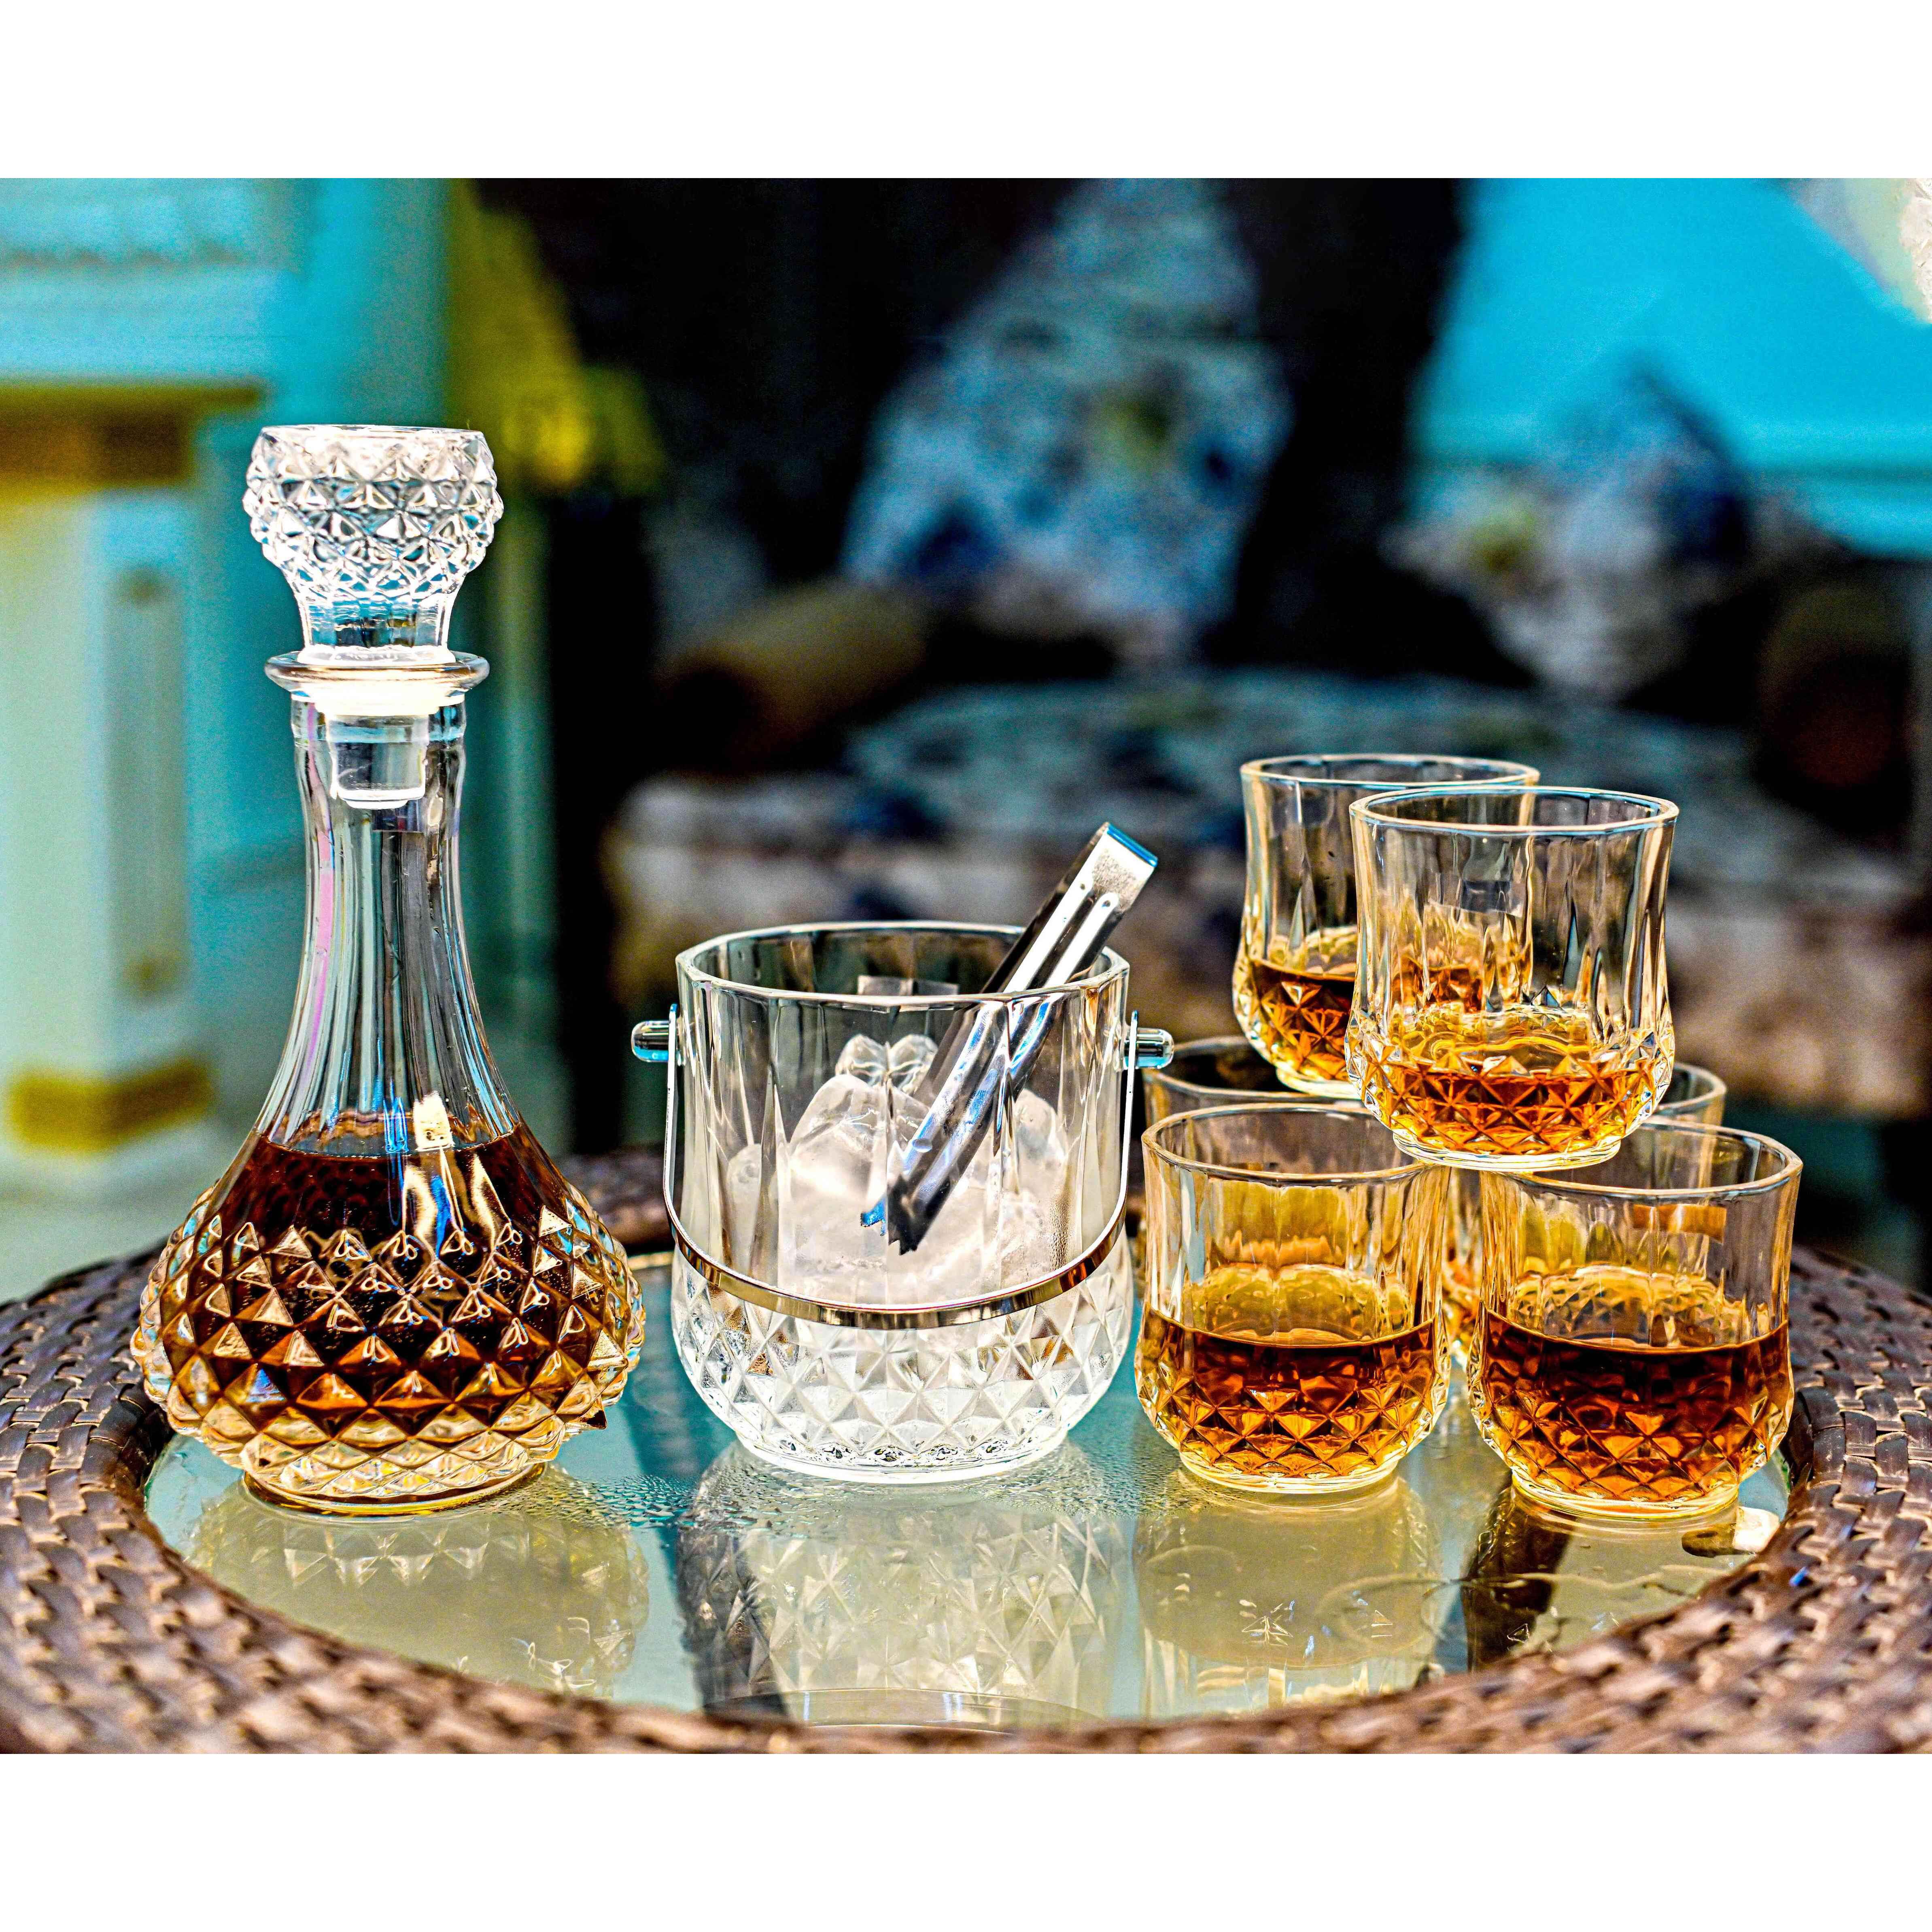 Everest Crystal Decanter Set With Glasses